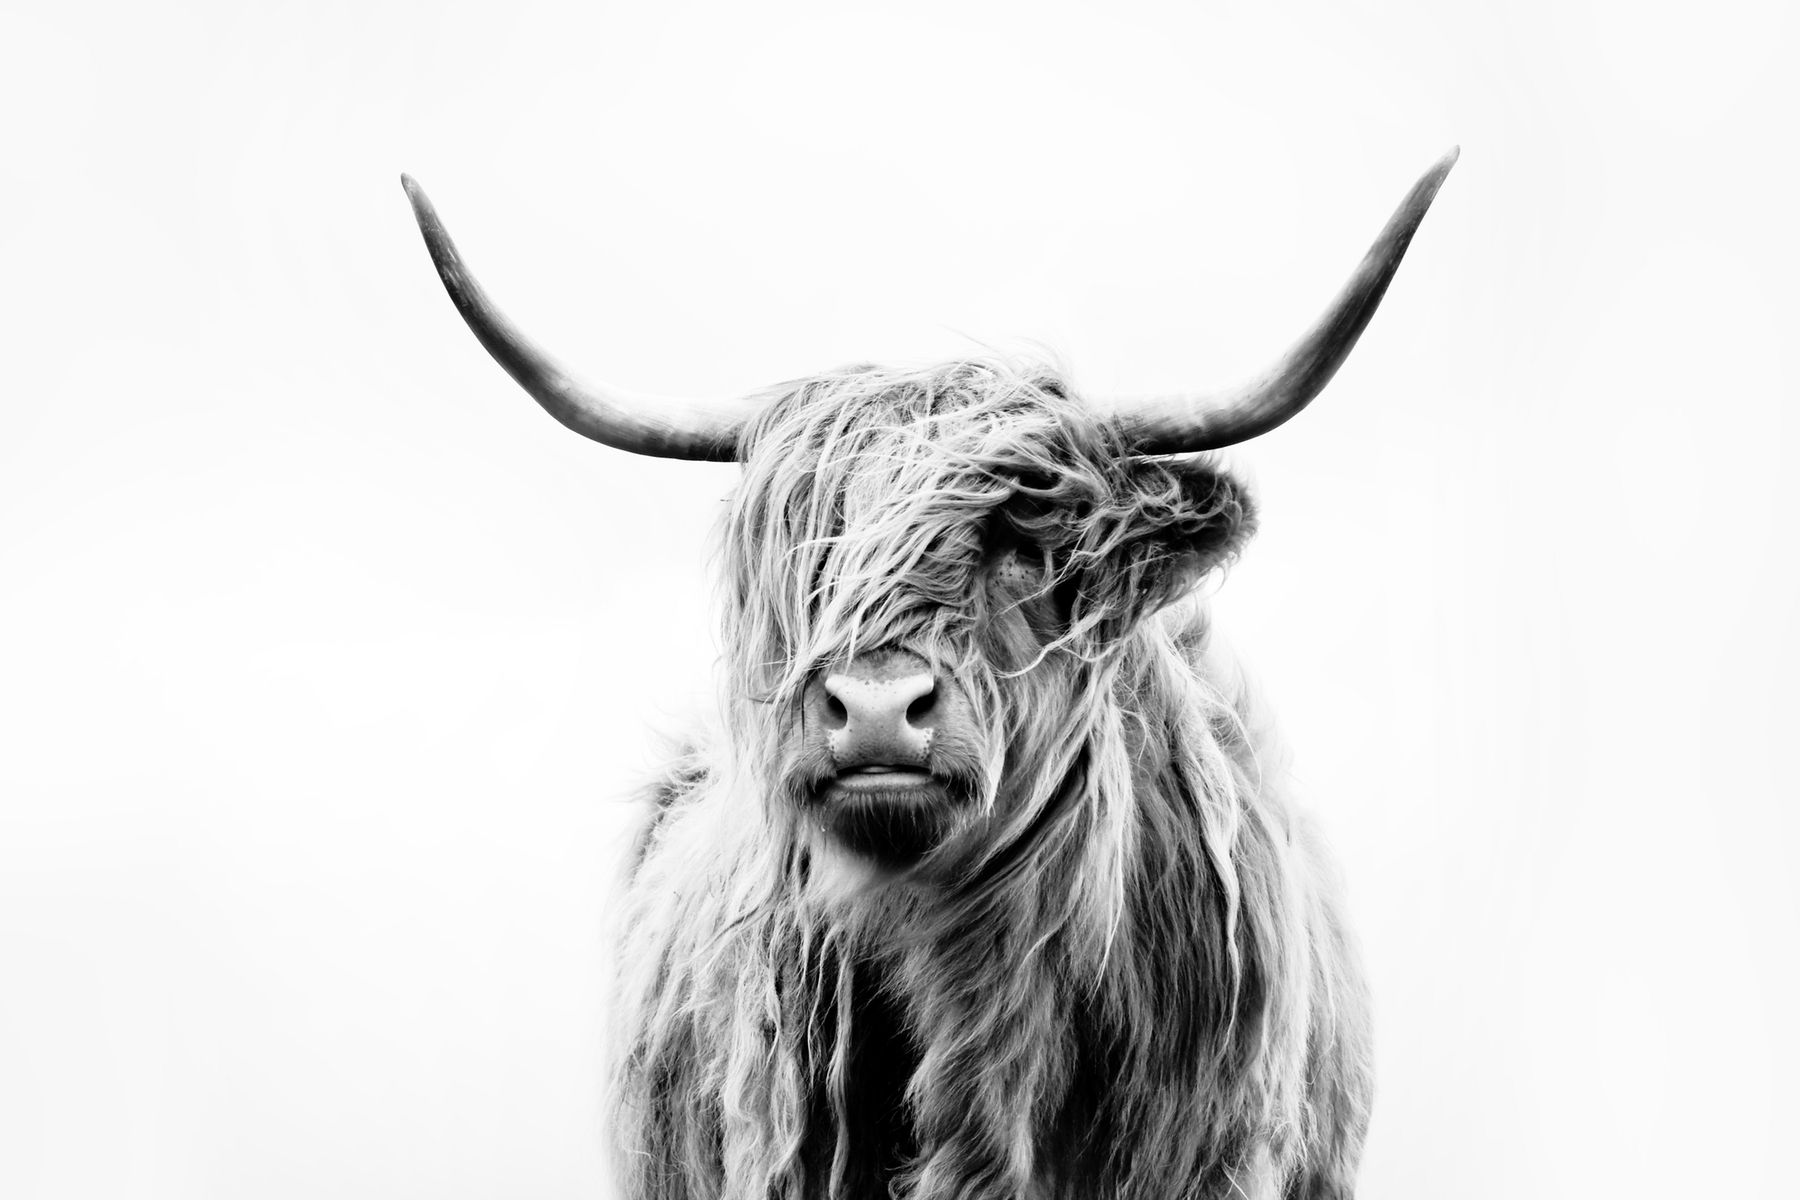 Buy Portrait of a Highland Cow wallpaper US shipping at Happywall.com